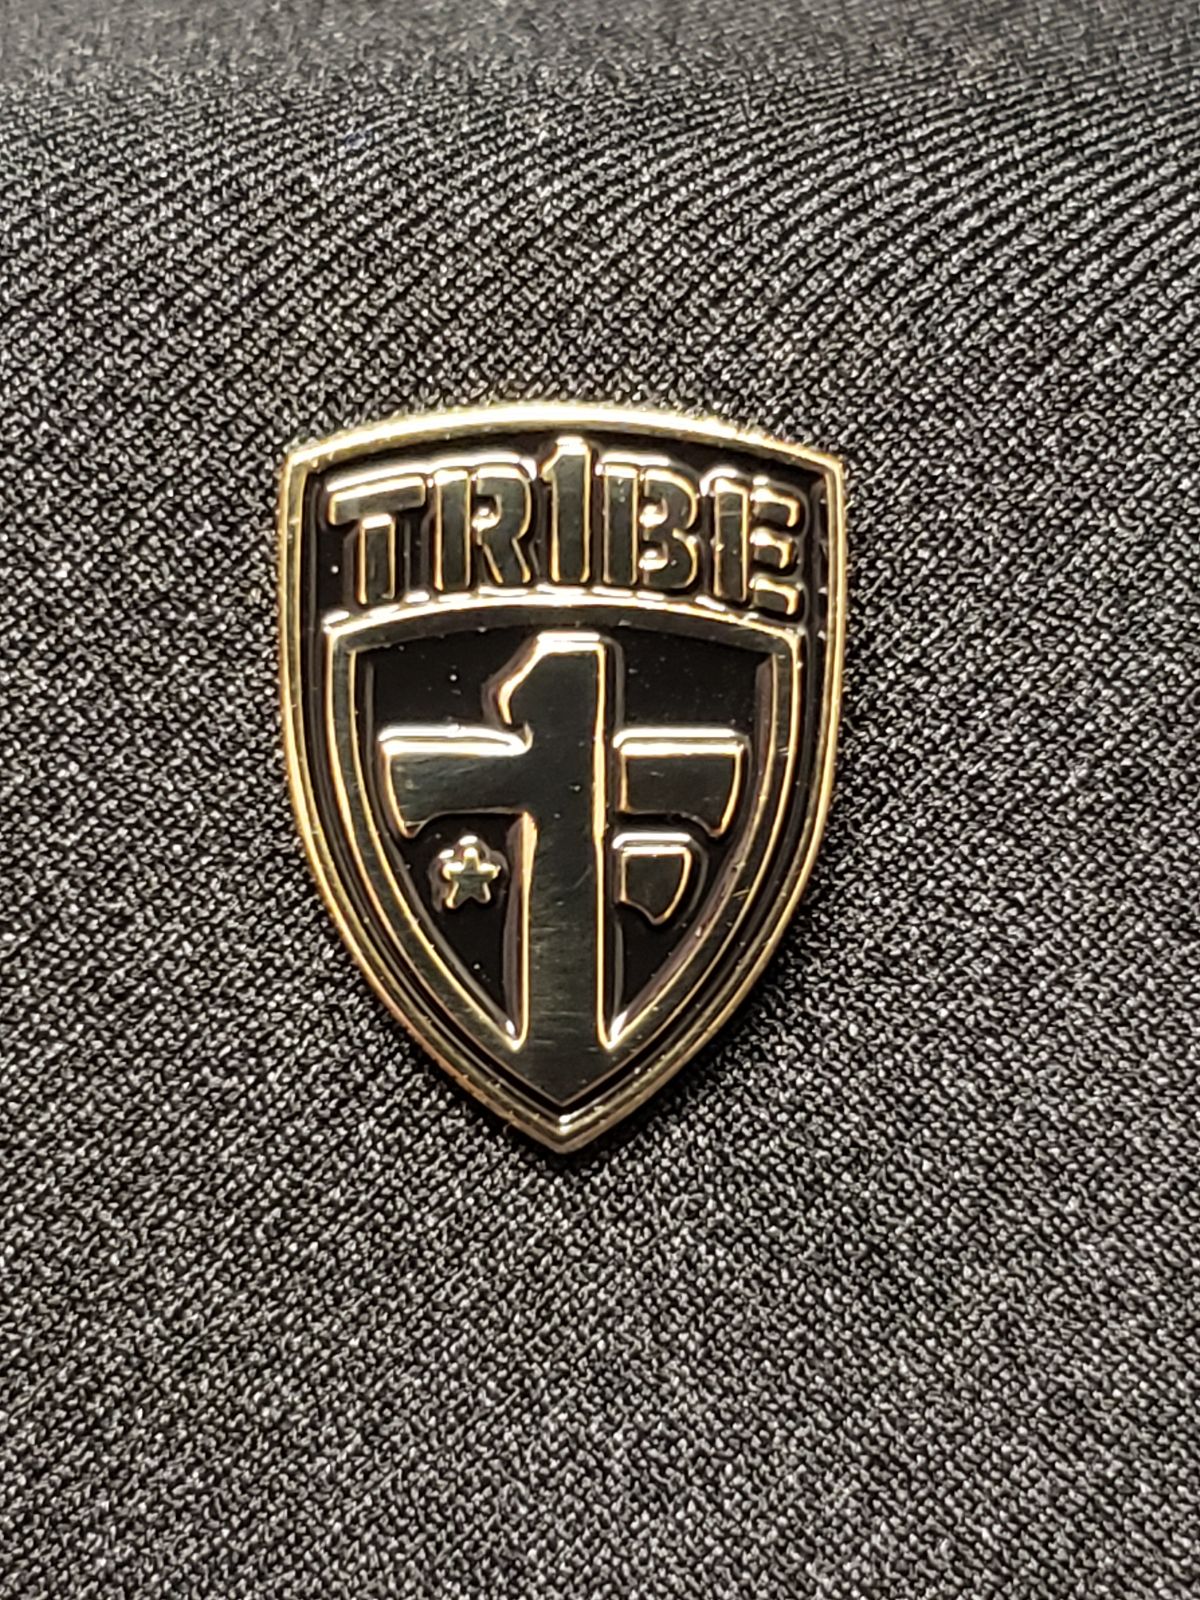 One Tribe Foundation lapel pin